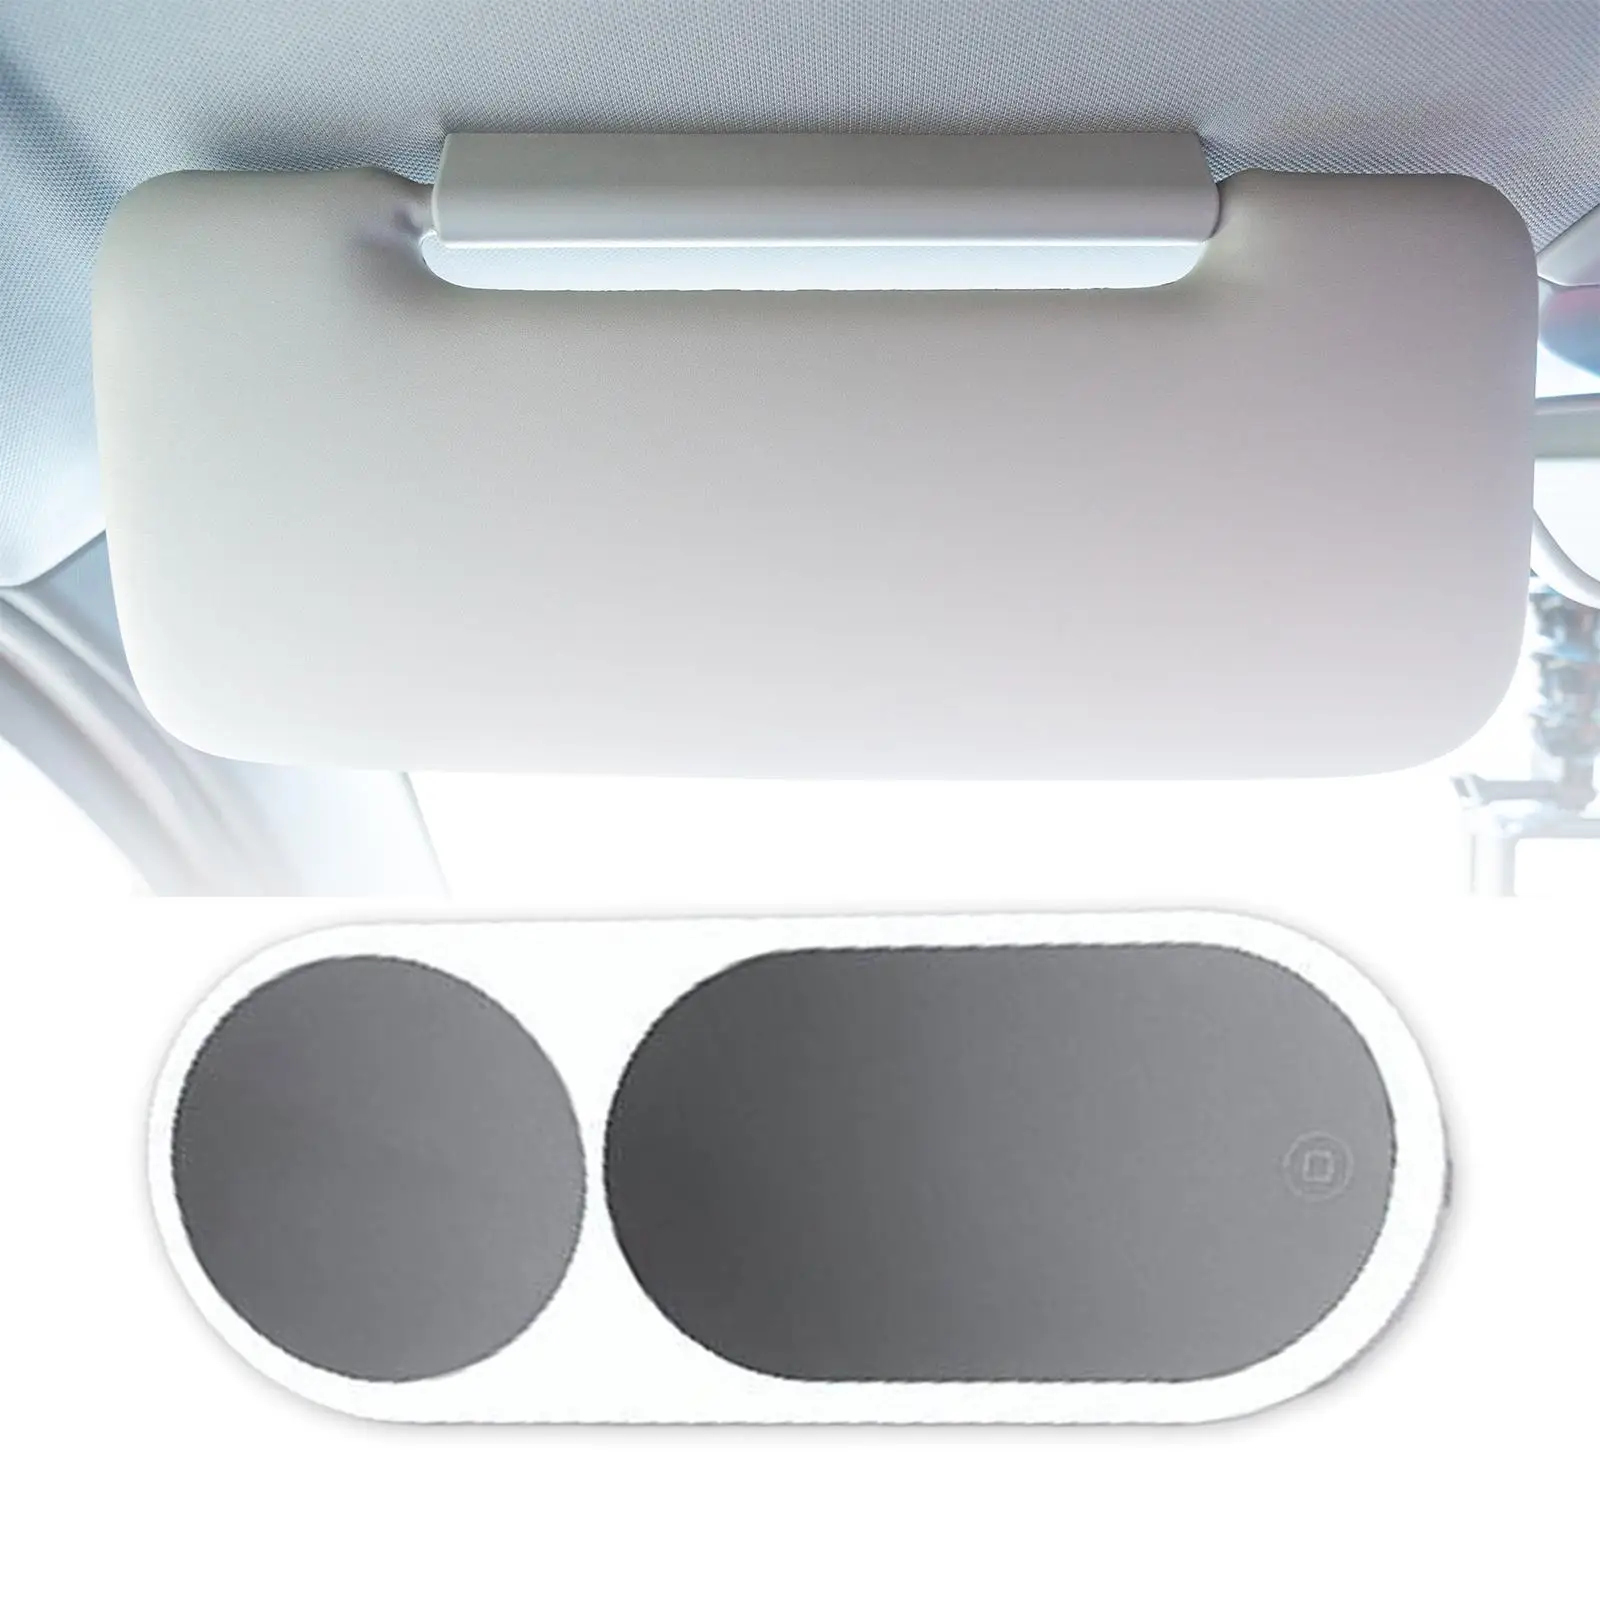 Car Sun Visor Makeup Mirror Replace Parts Easy to Install Car Accessories High Stretch Rubber Straps for Car Truck Vehicles